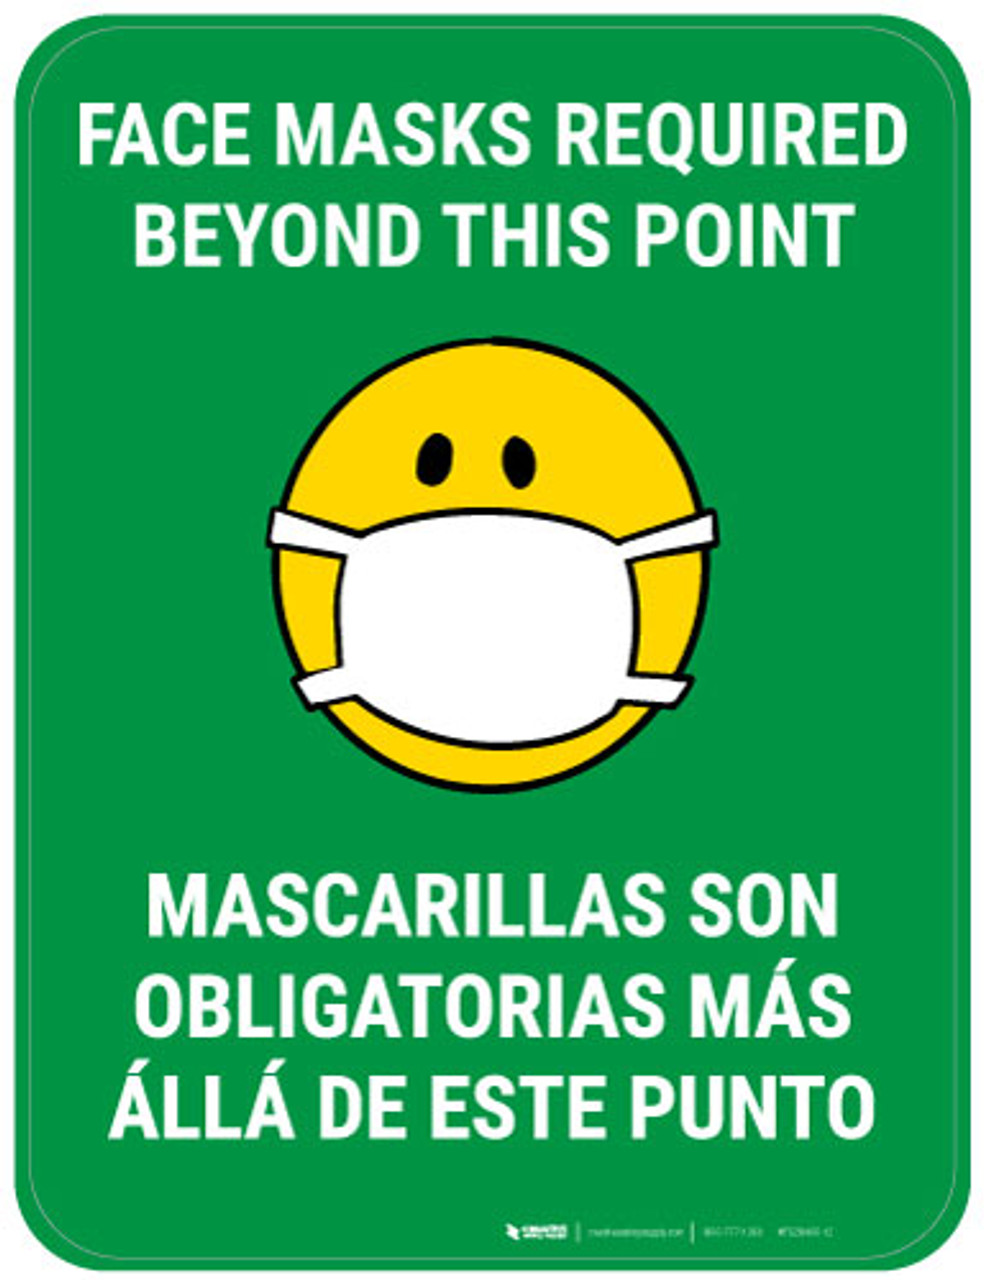 face-masks-required-beyond-this-point-bilingual-with-facemask-emoji-green-floor-sign